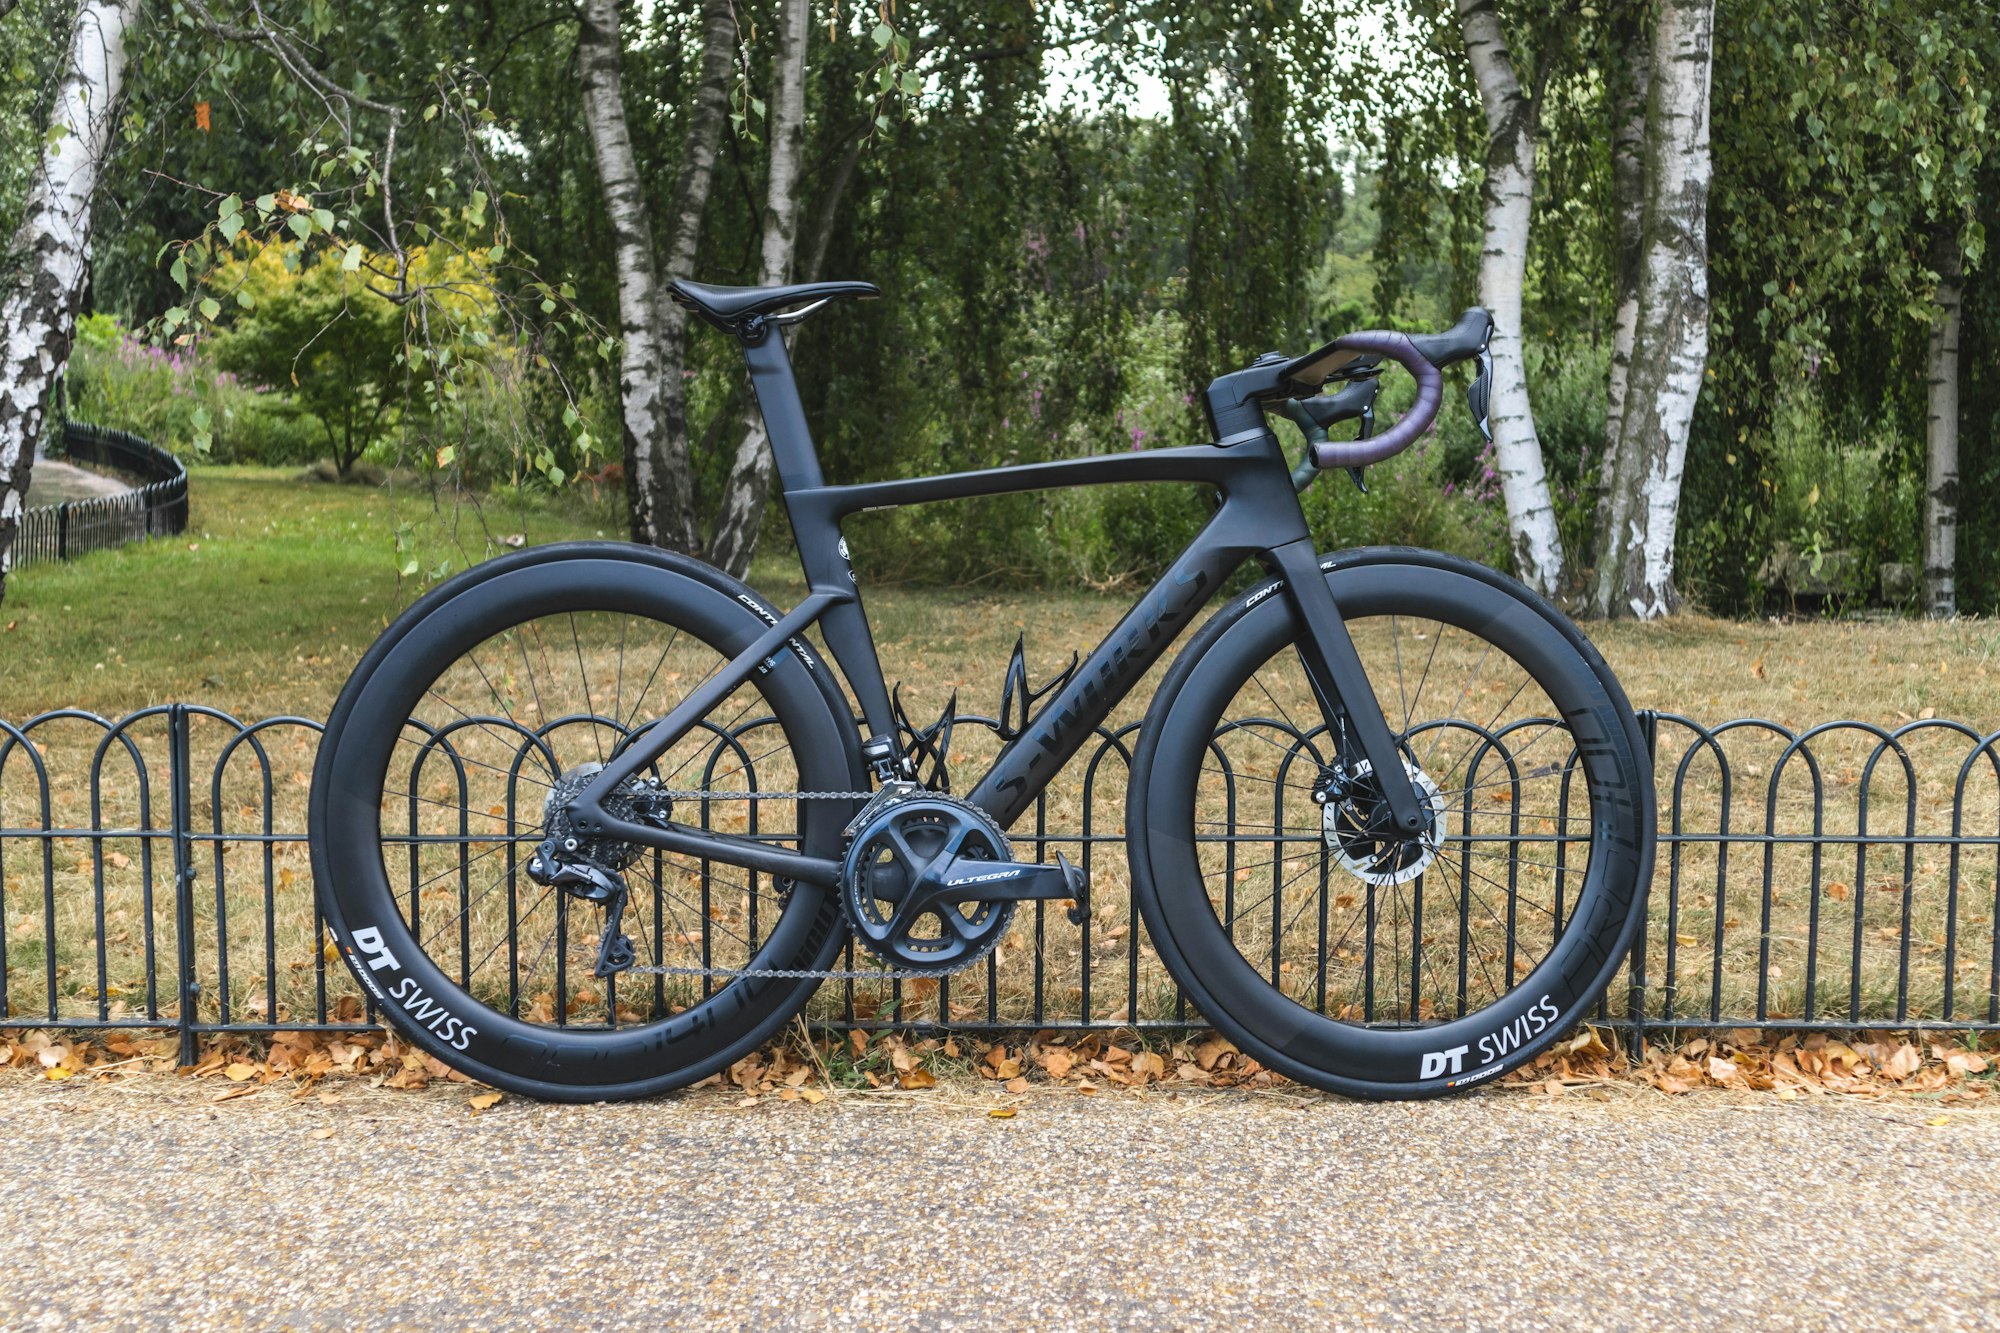 A show of the 2020 Specialized Venge Vias carbon road bike with DT Swiss wheels in Regent's Park